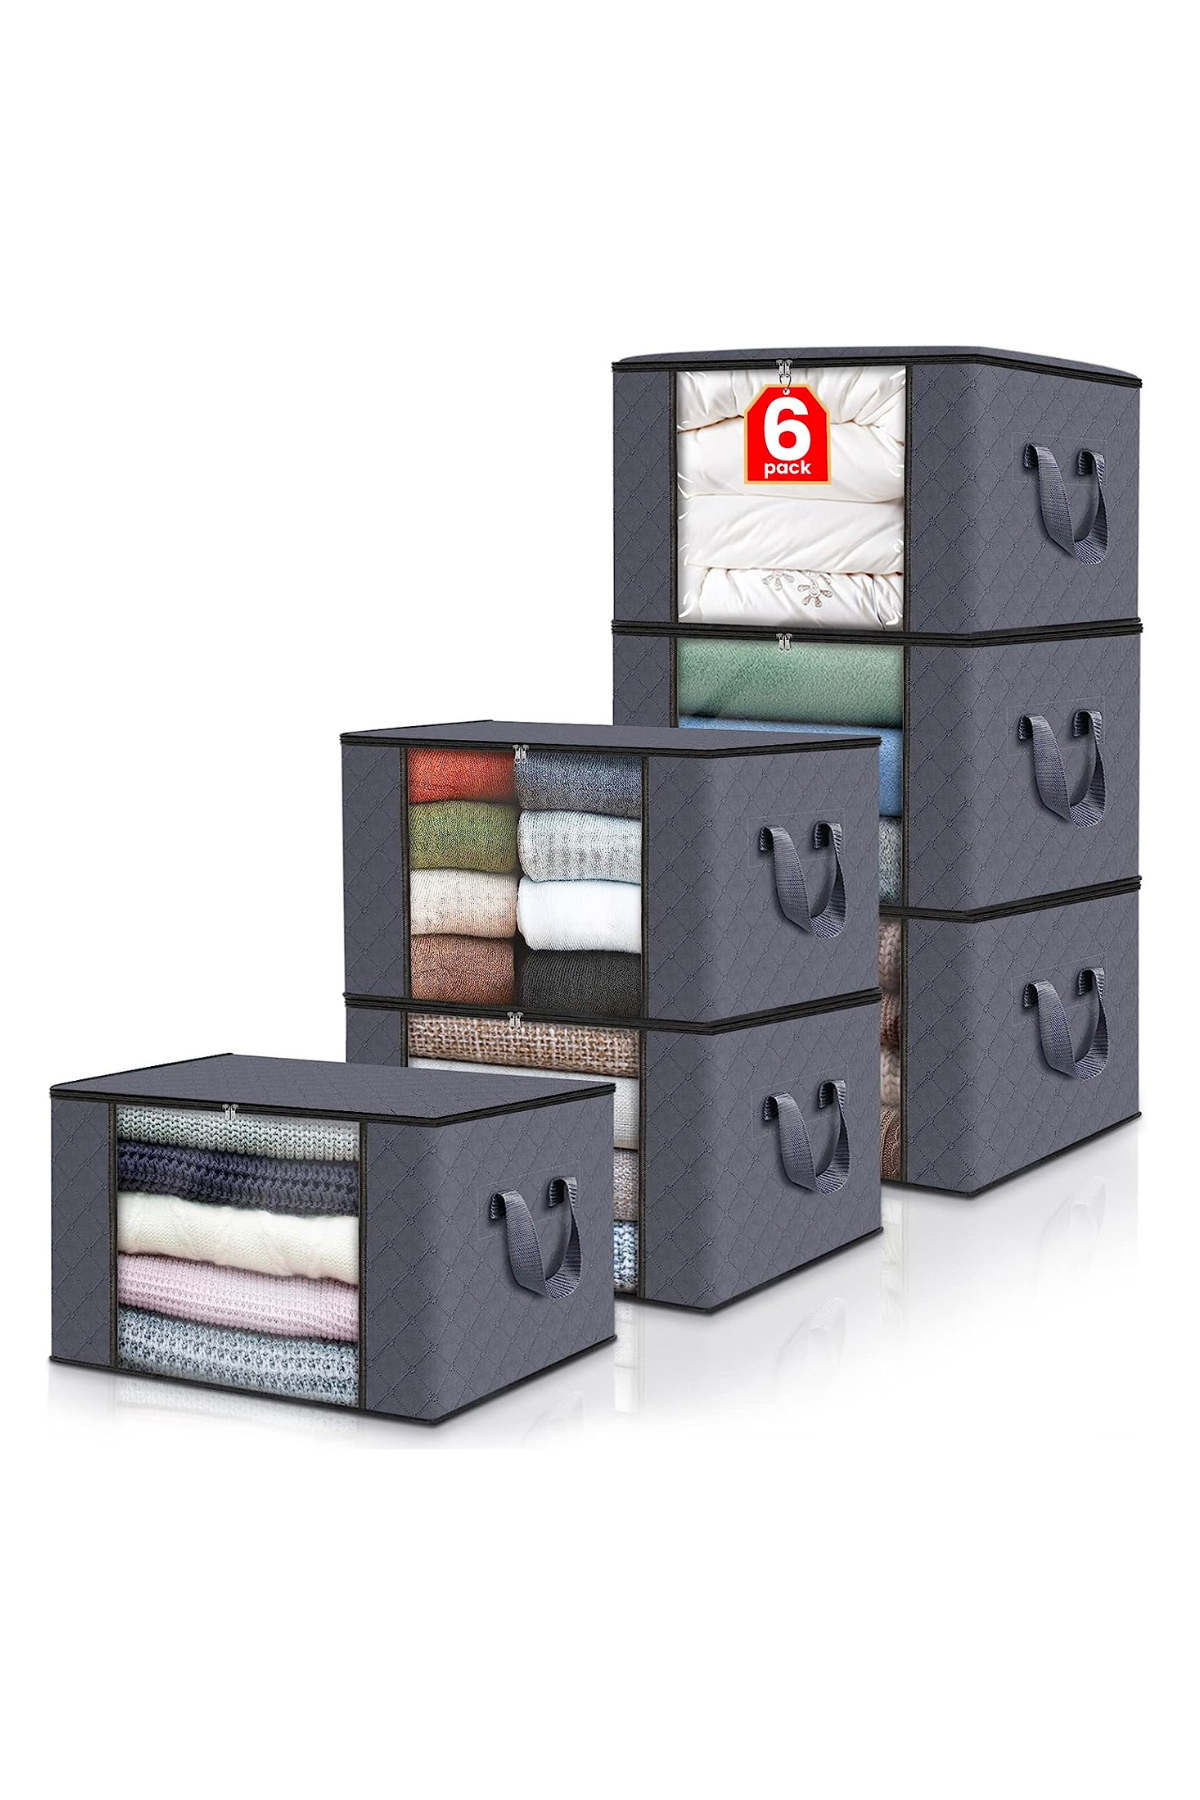 Fab totes 6 Pack Clothes Storage, Foldable Blanket Storage Bags, Storage Containers for Organizing Bedroom, Closet, Clothing, Comforter, Organization and...